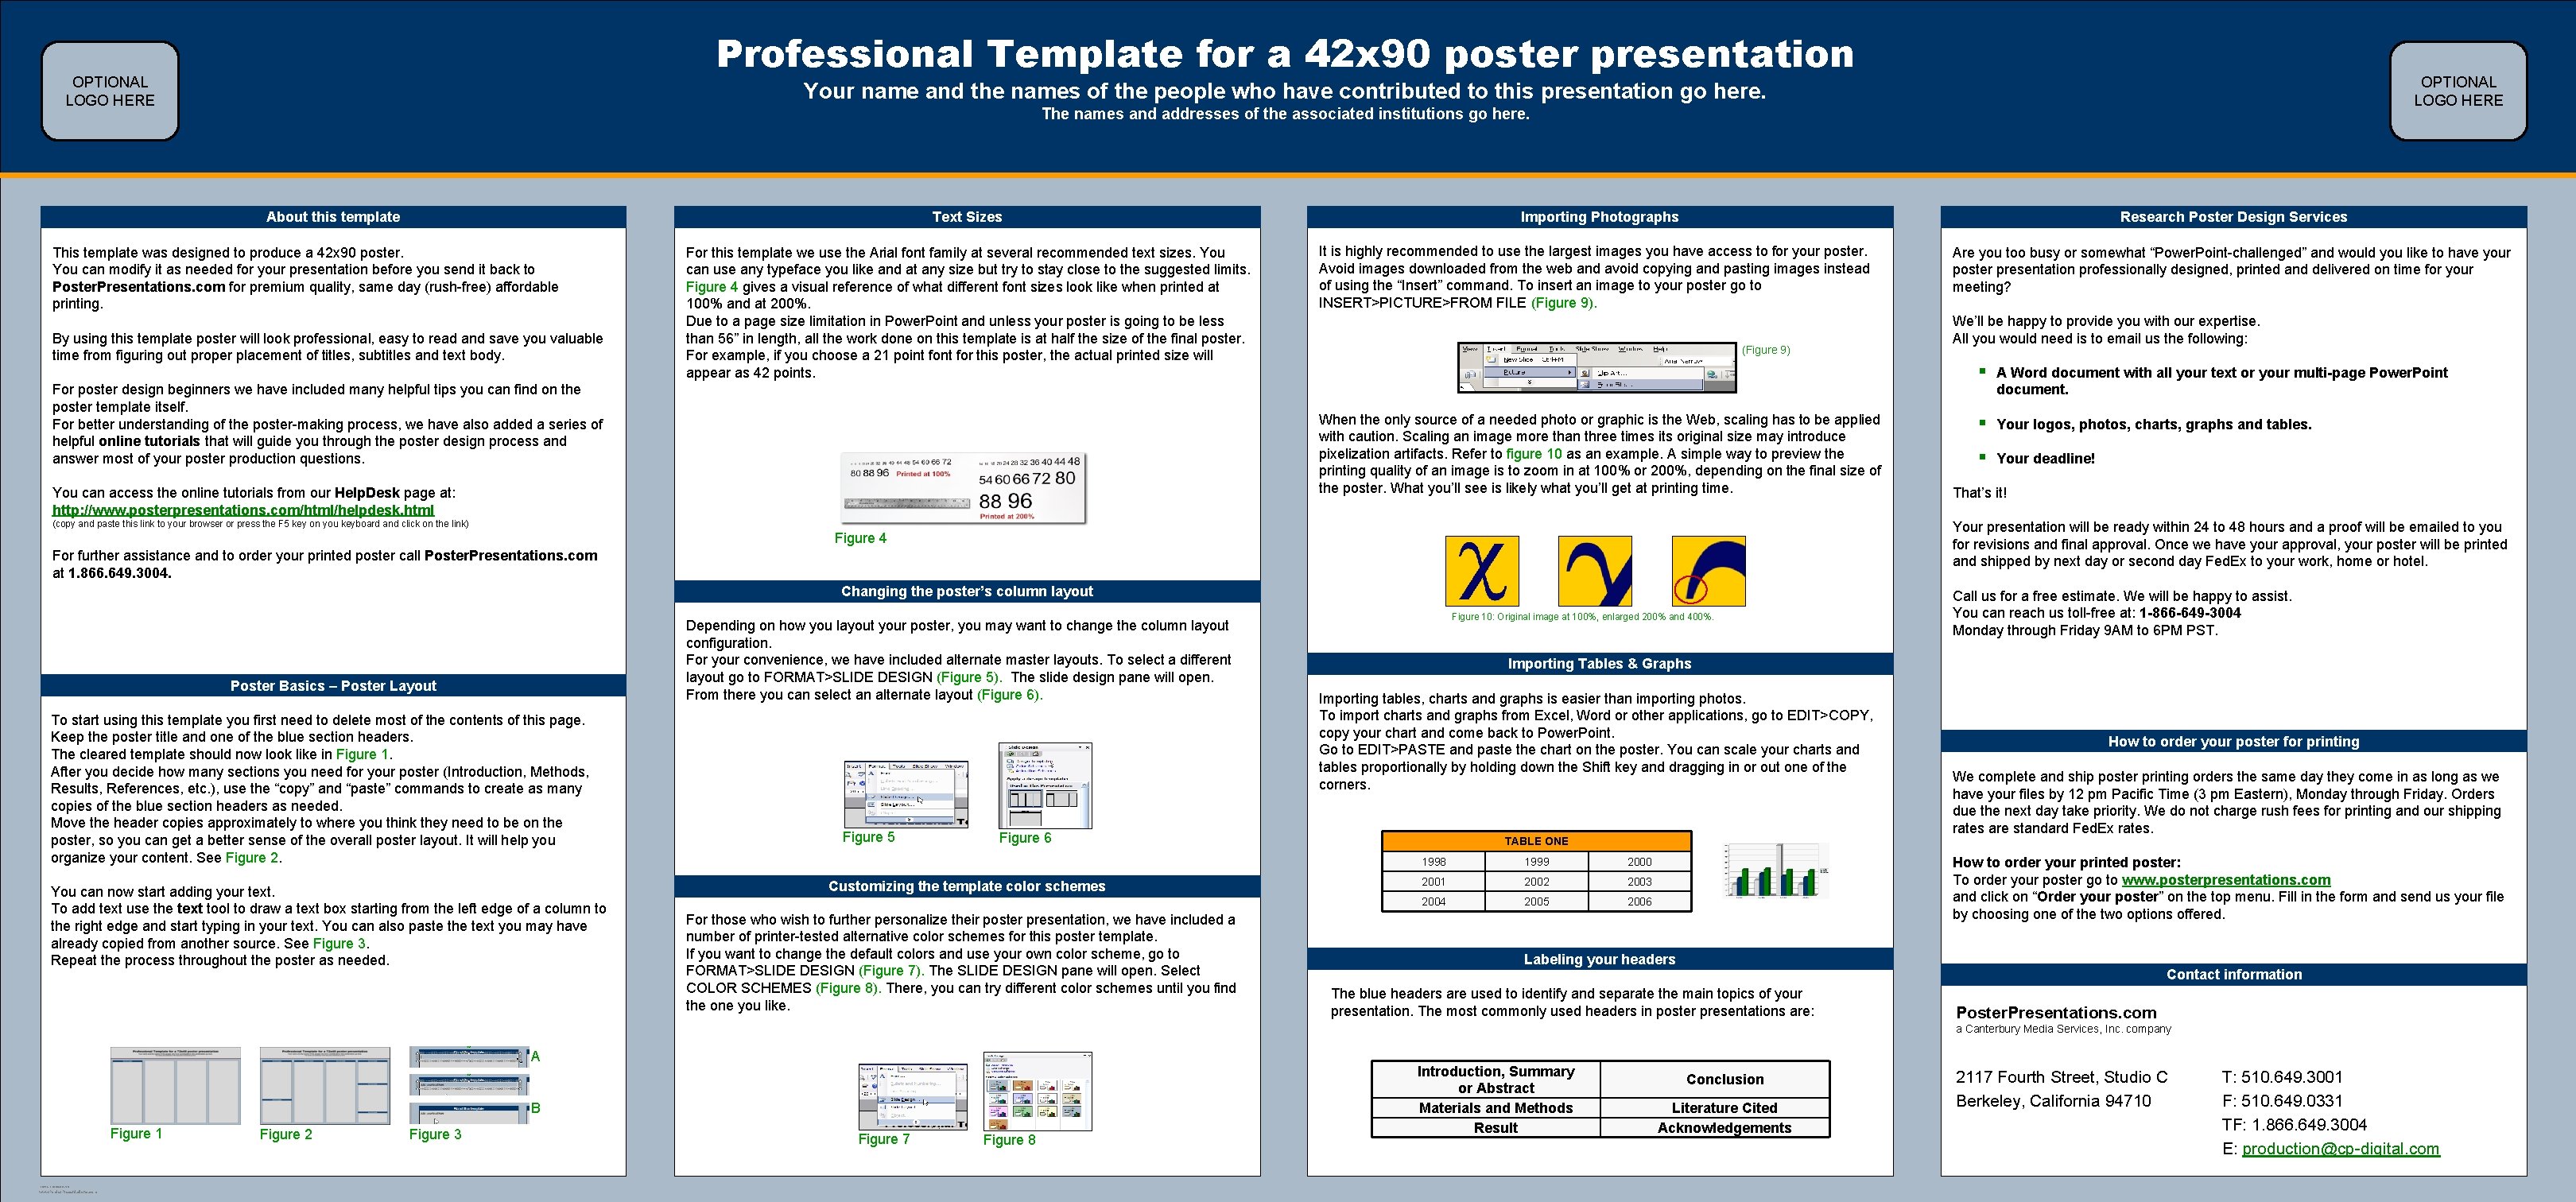 Professional Template for a 42 x 90 poster presentation OPTIONAL LOGO HERE Your name